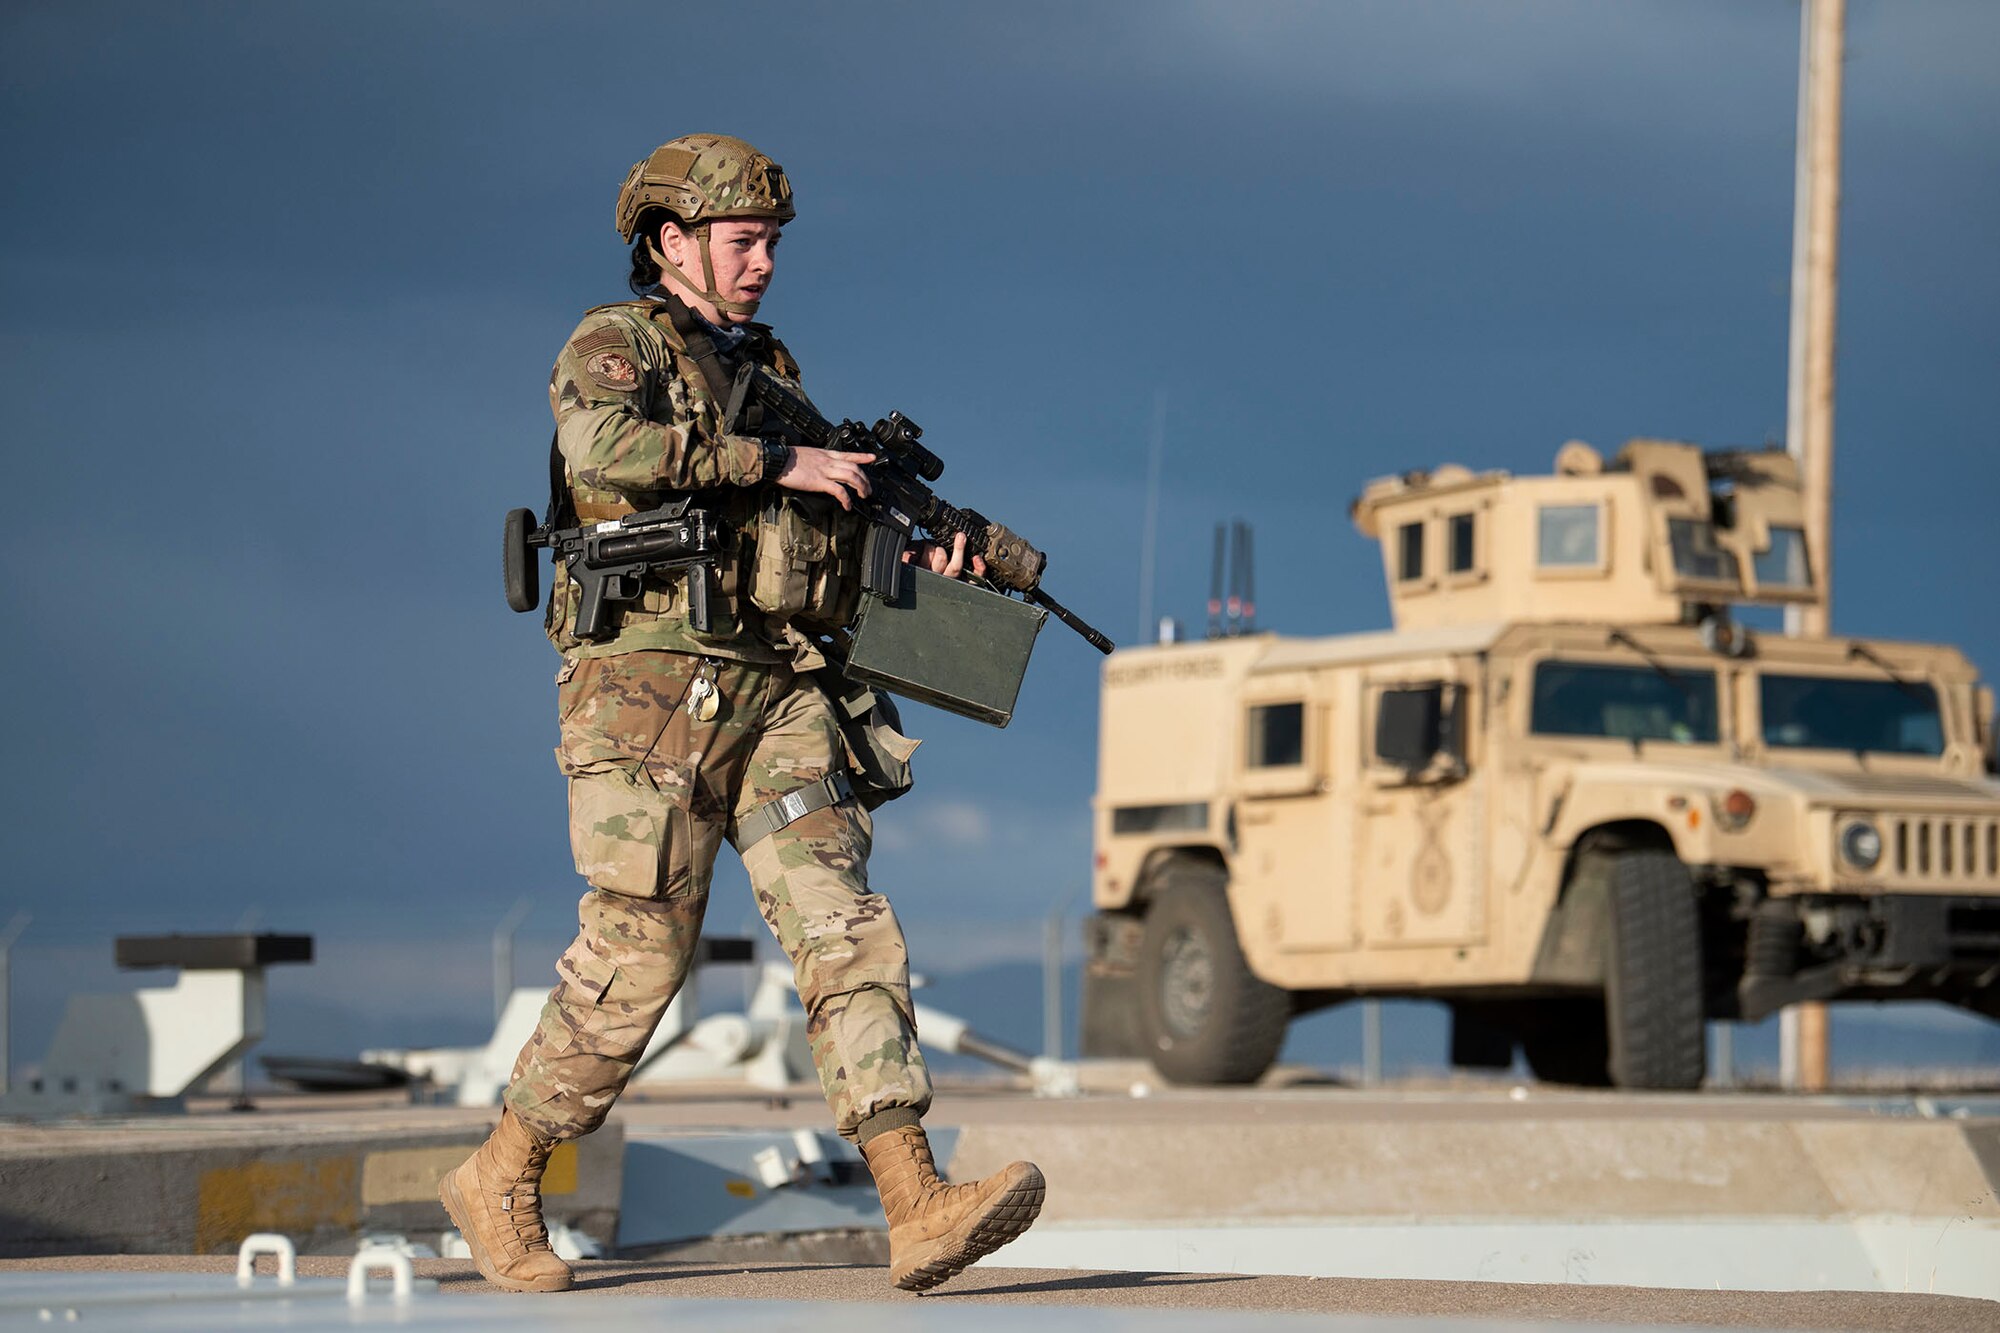 A female defender moves across the launch facility carrying a rifle and an ammo container, with a Humvee in the background.